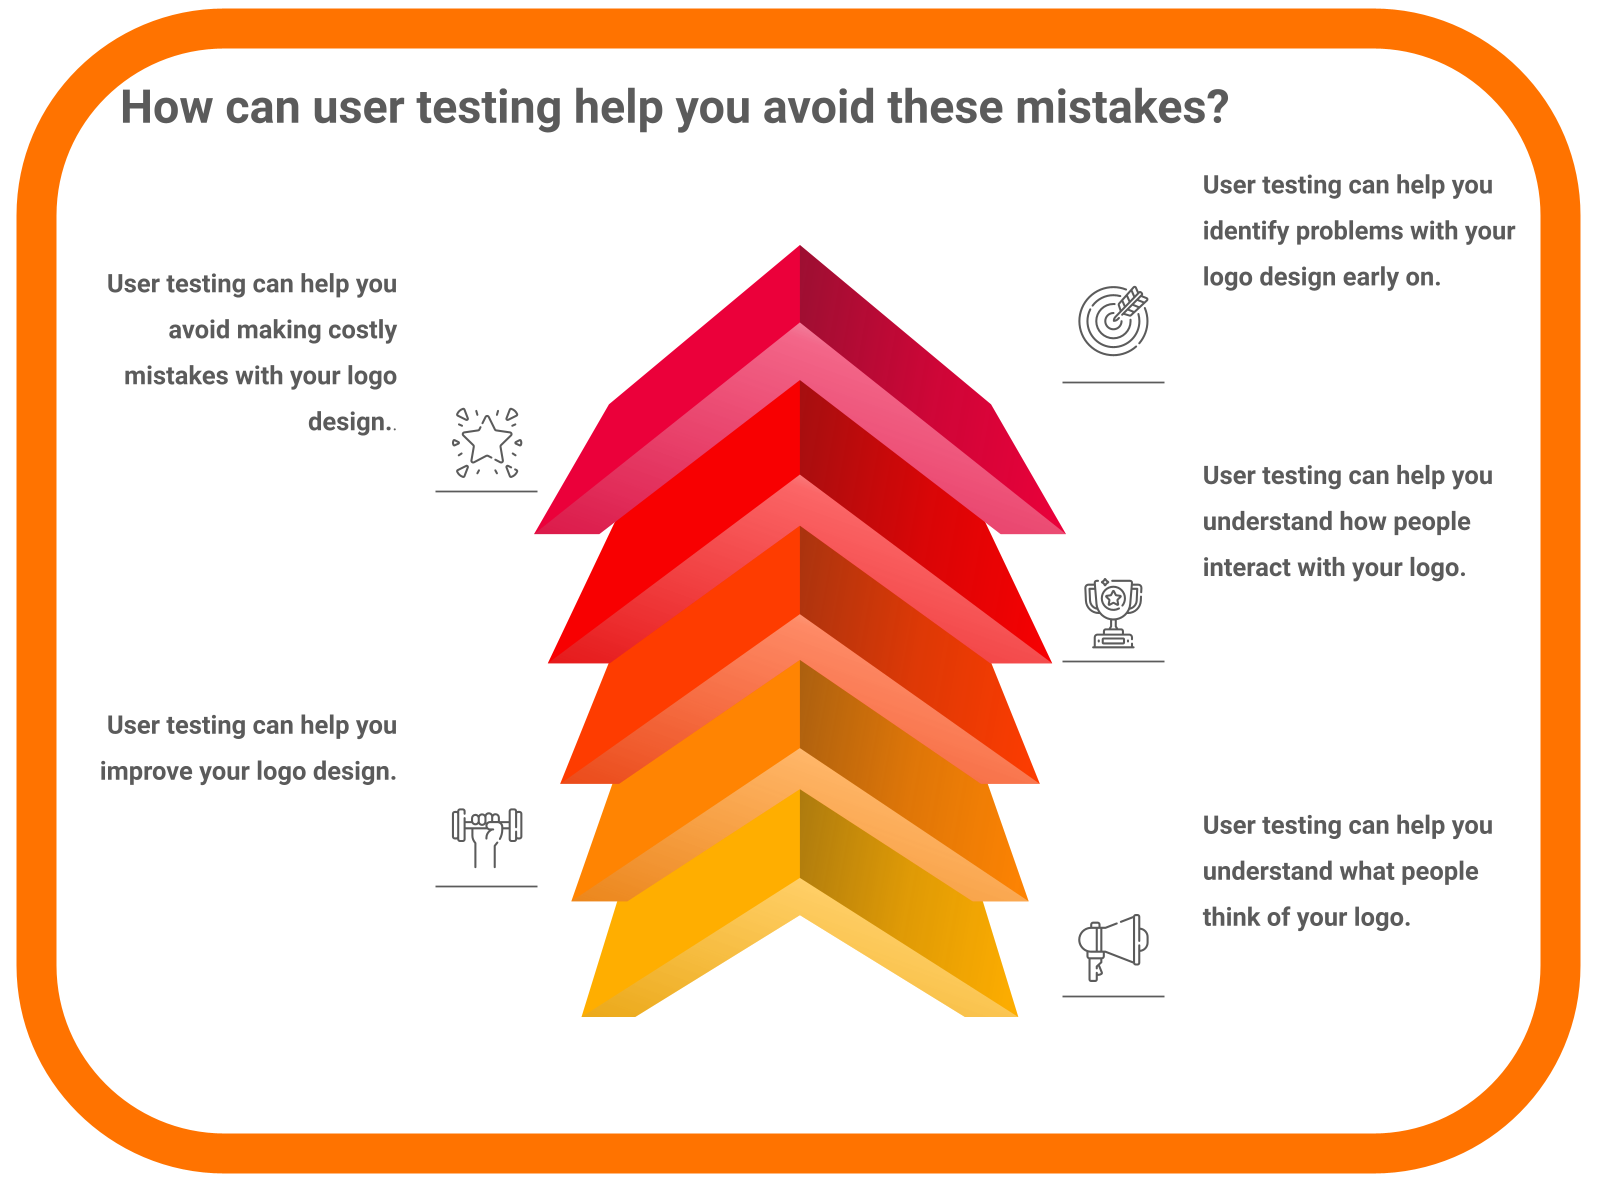 How can user testing help you avoid these mistakes?